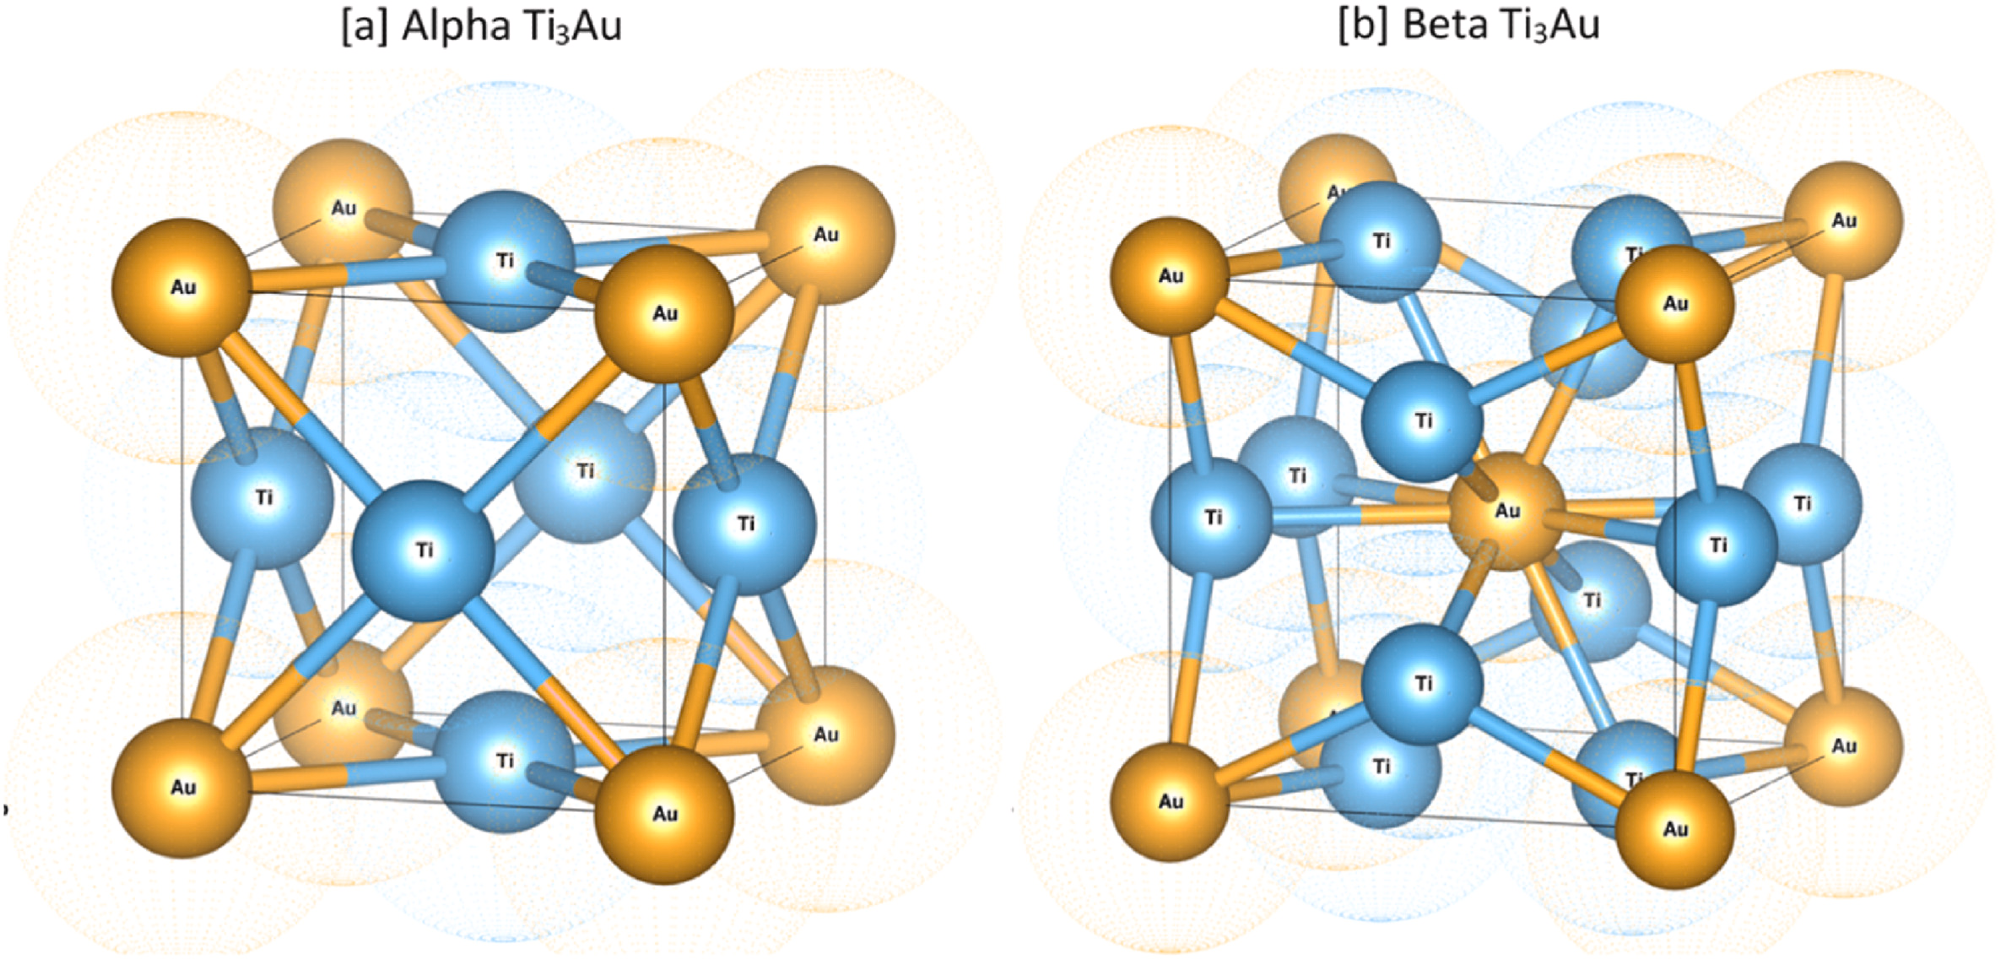 Unit cell structure showing the difference between the coordination configuration of Ti atoms in a and ß-phase.